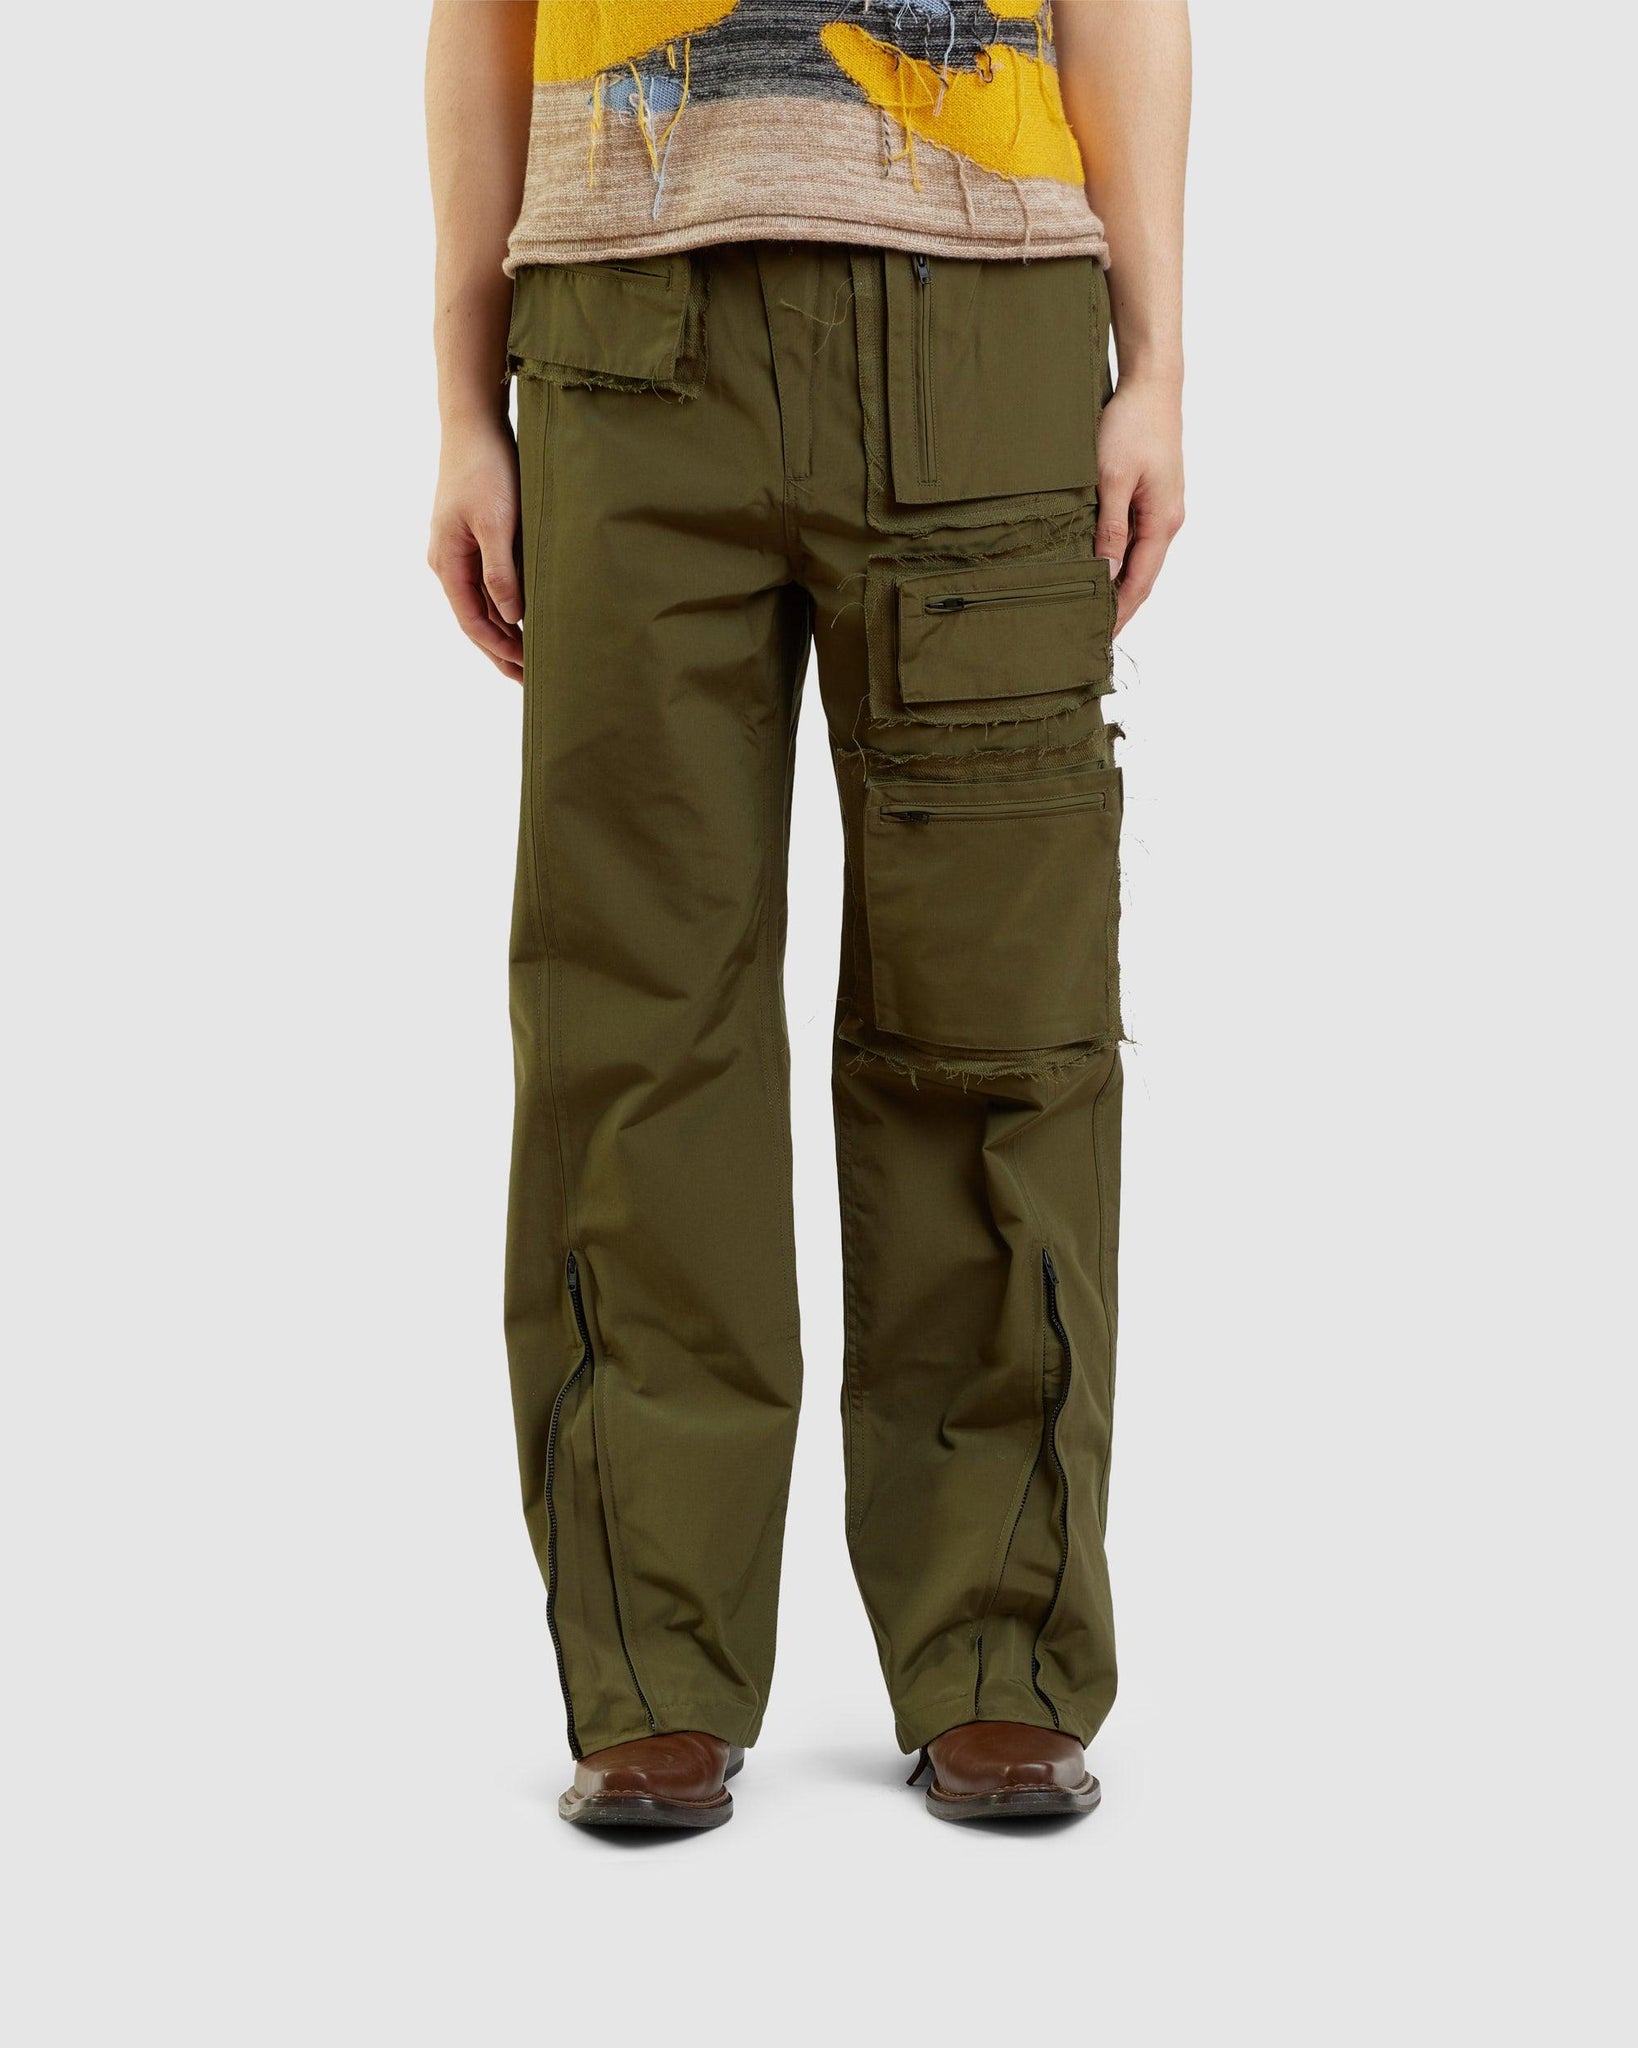 Raw Edge Multi-Pocket Pants - {{ collection.title }} - Chinatown Country Club 